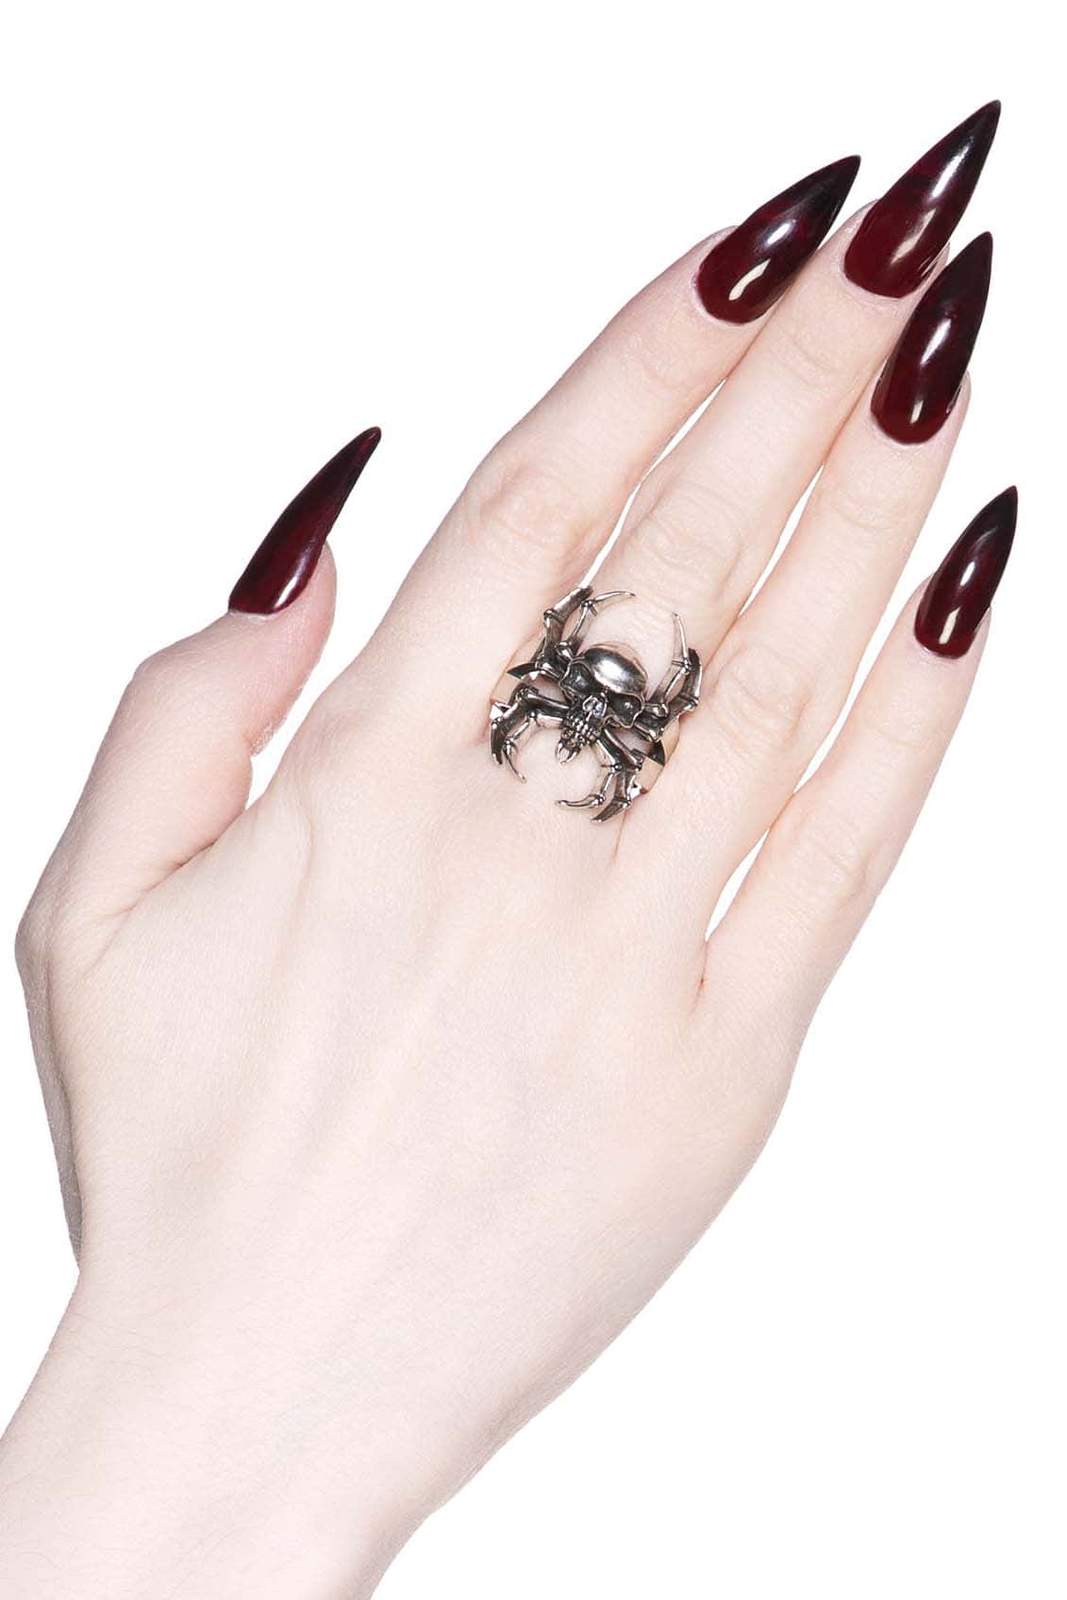 Deadly Spider Ring